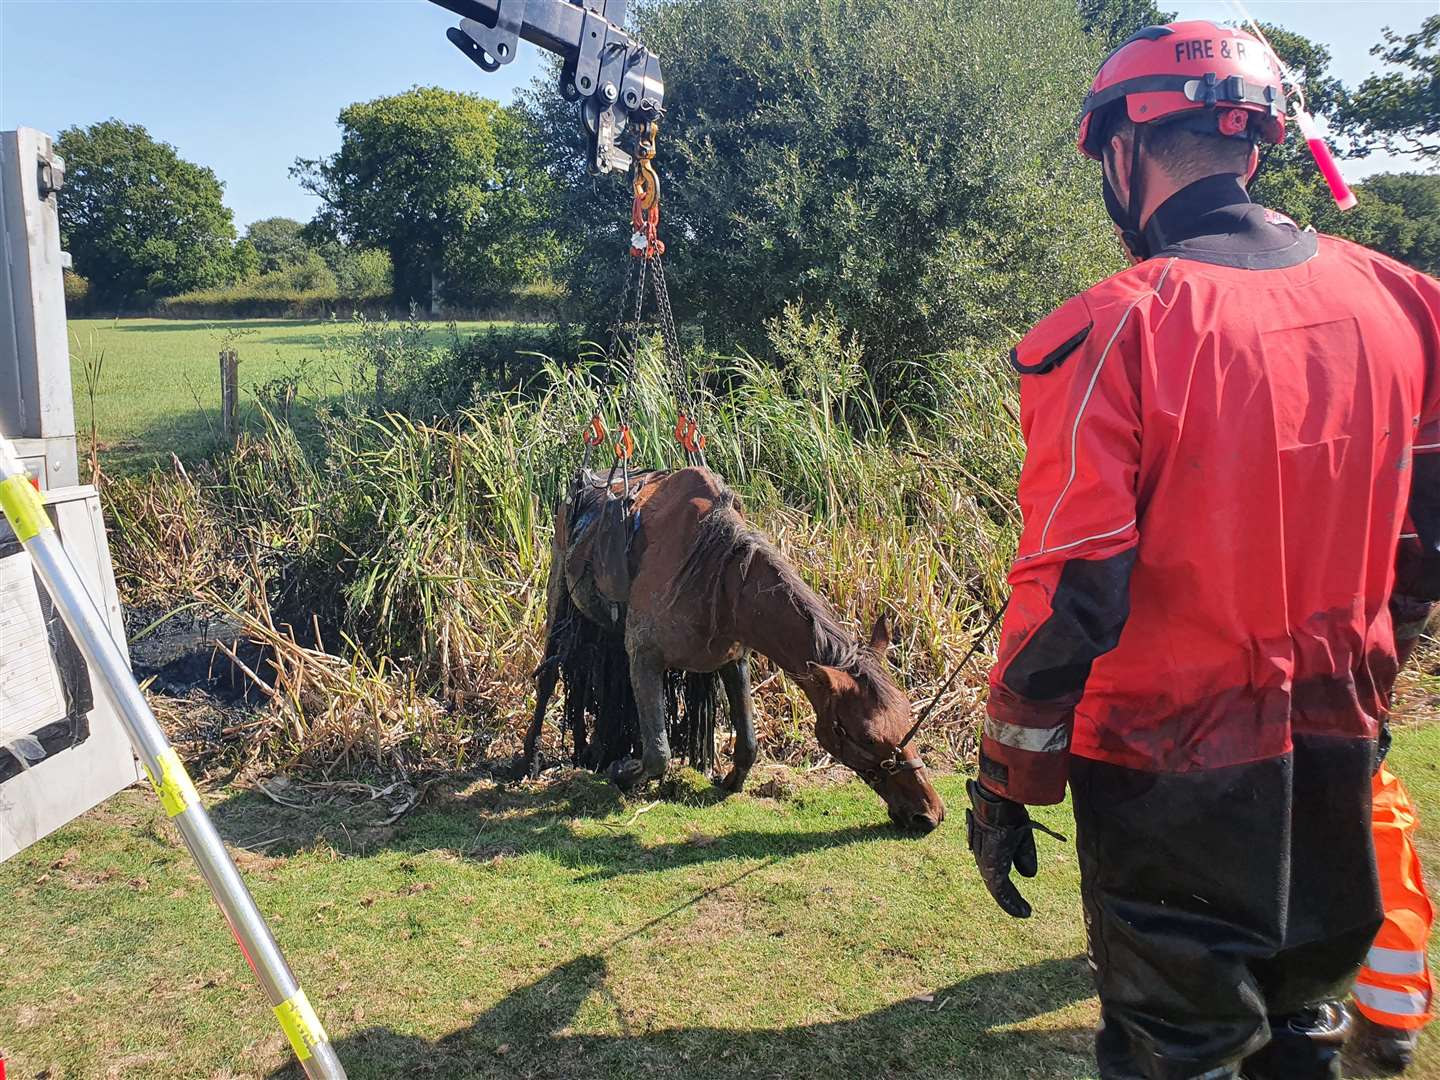 Fire services helped Kaddy out of the mud. Photo: KFRS